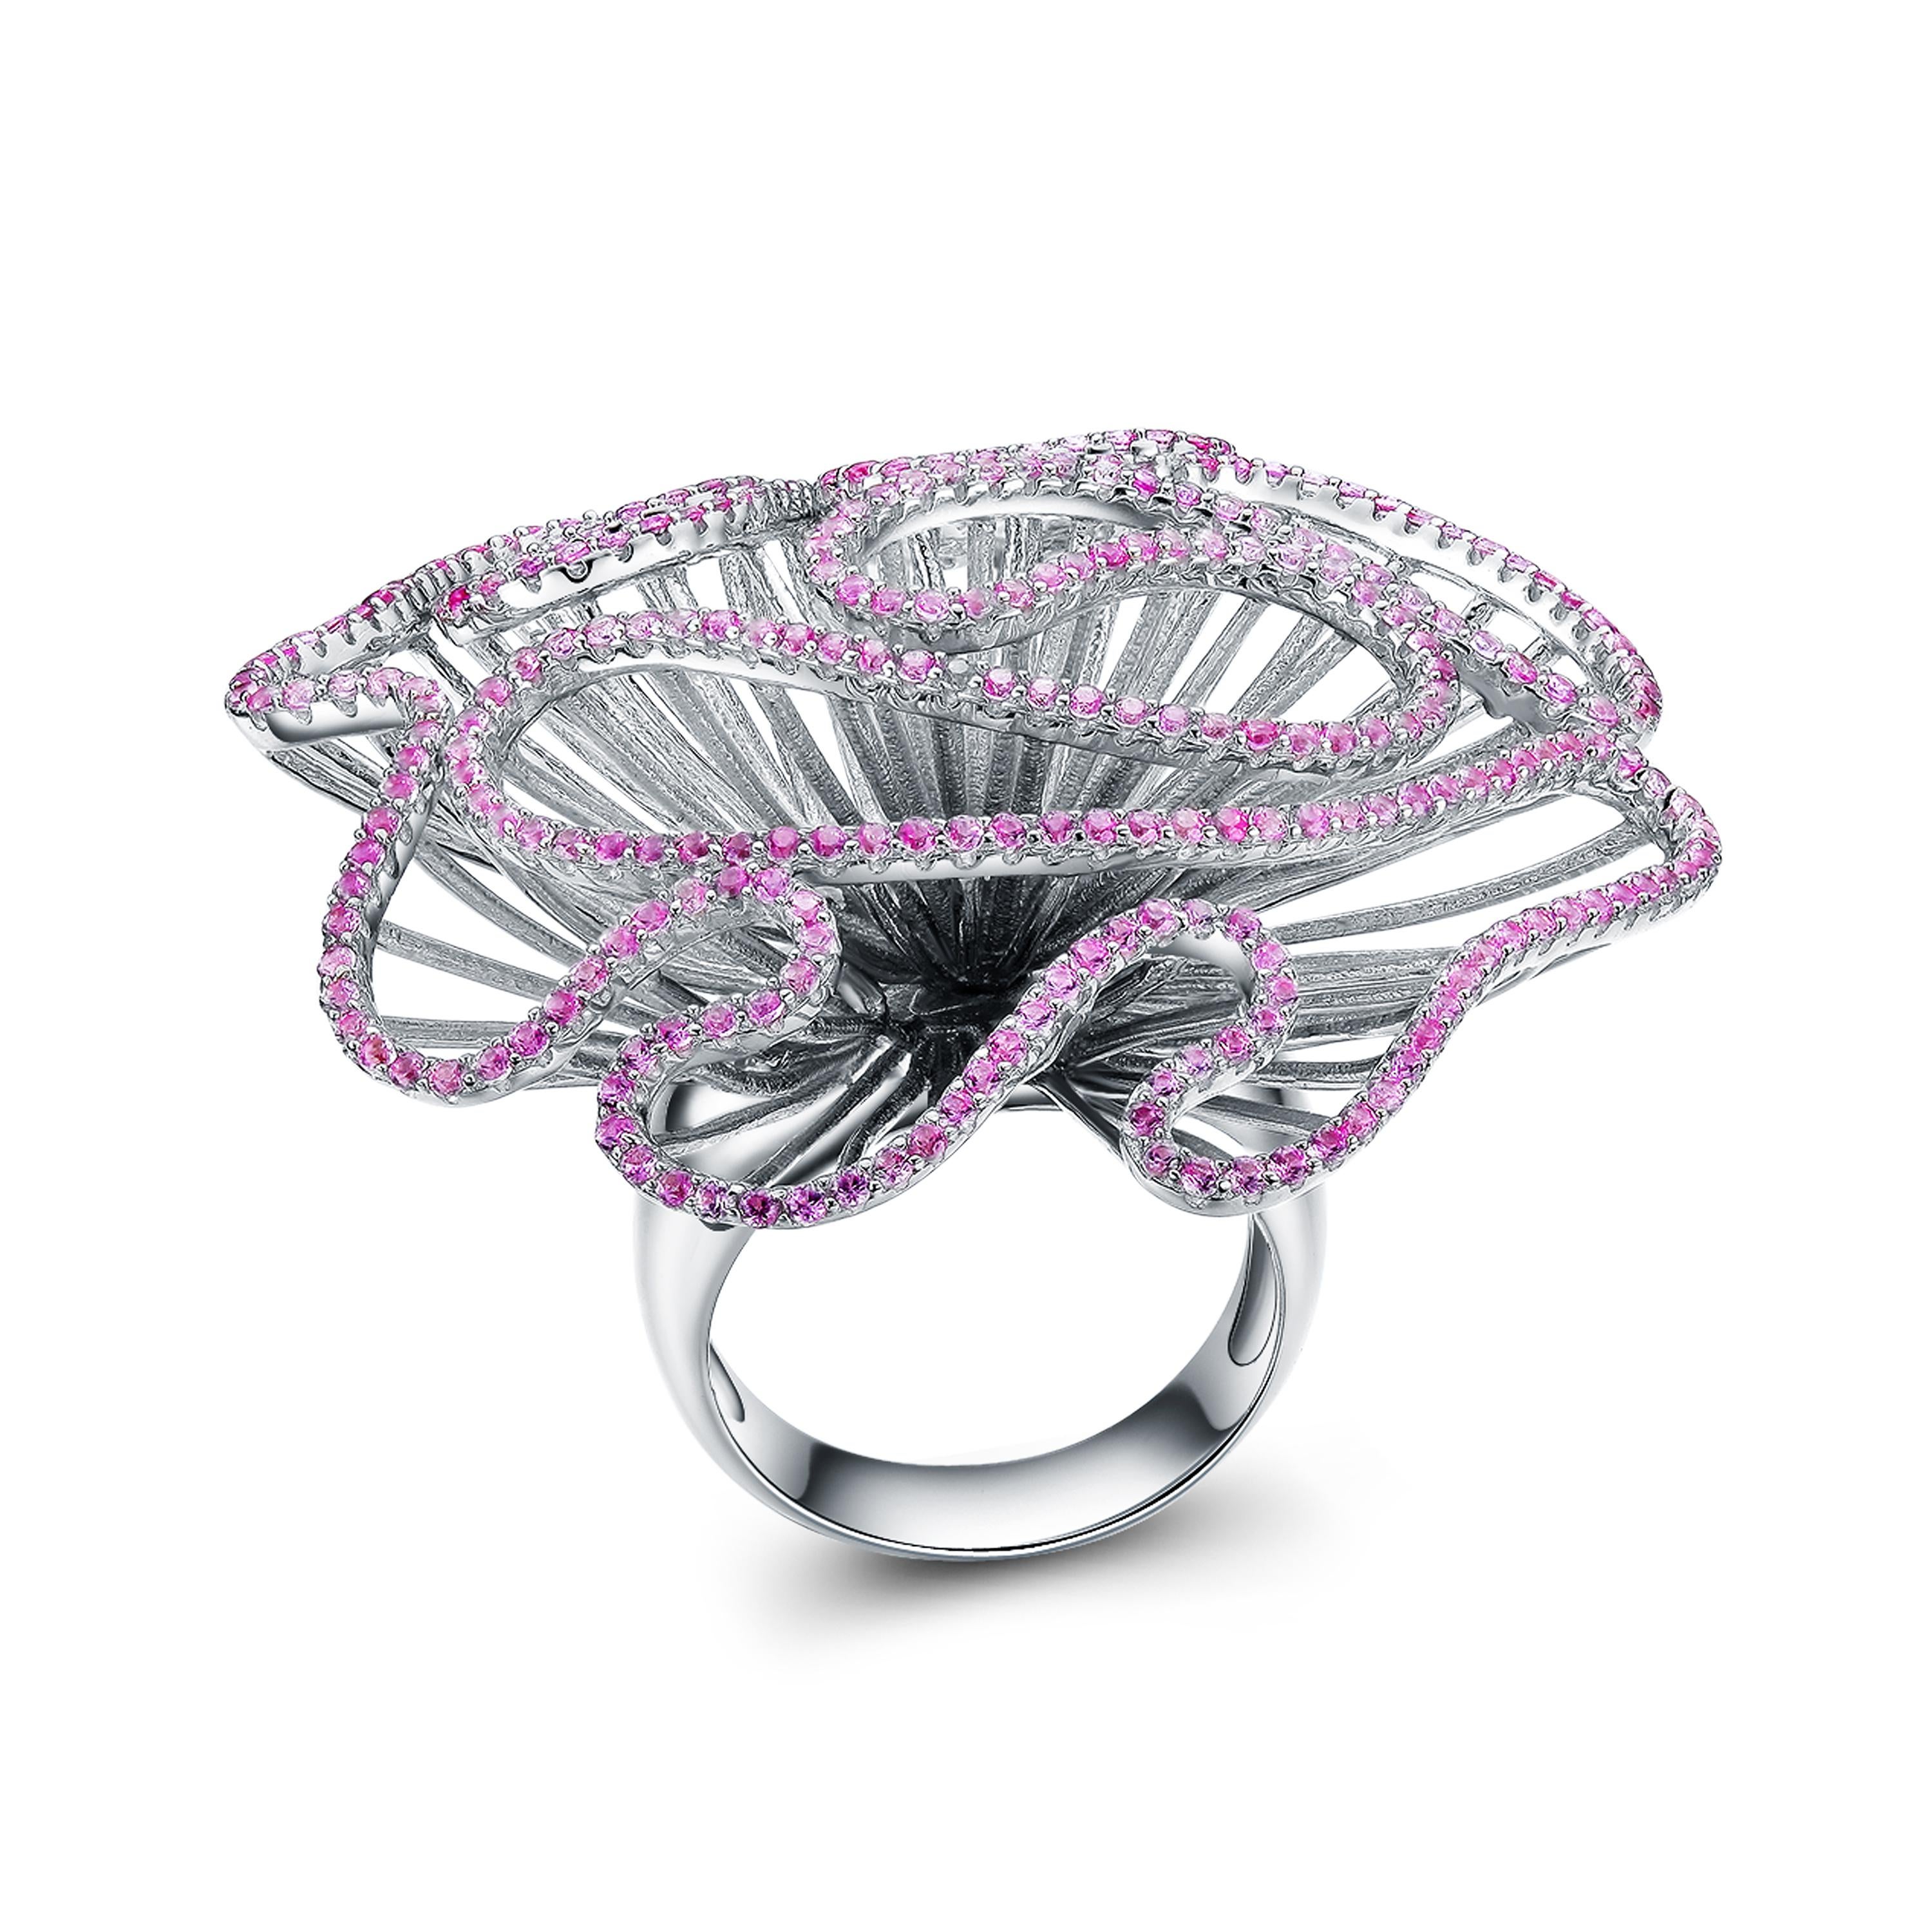 Contemporary Fei Liu Hearts and Arrows Pink Cubic Zirconia Sterling Silver Cocktail Ring